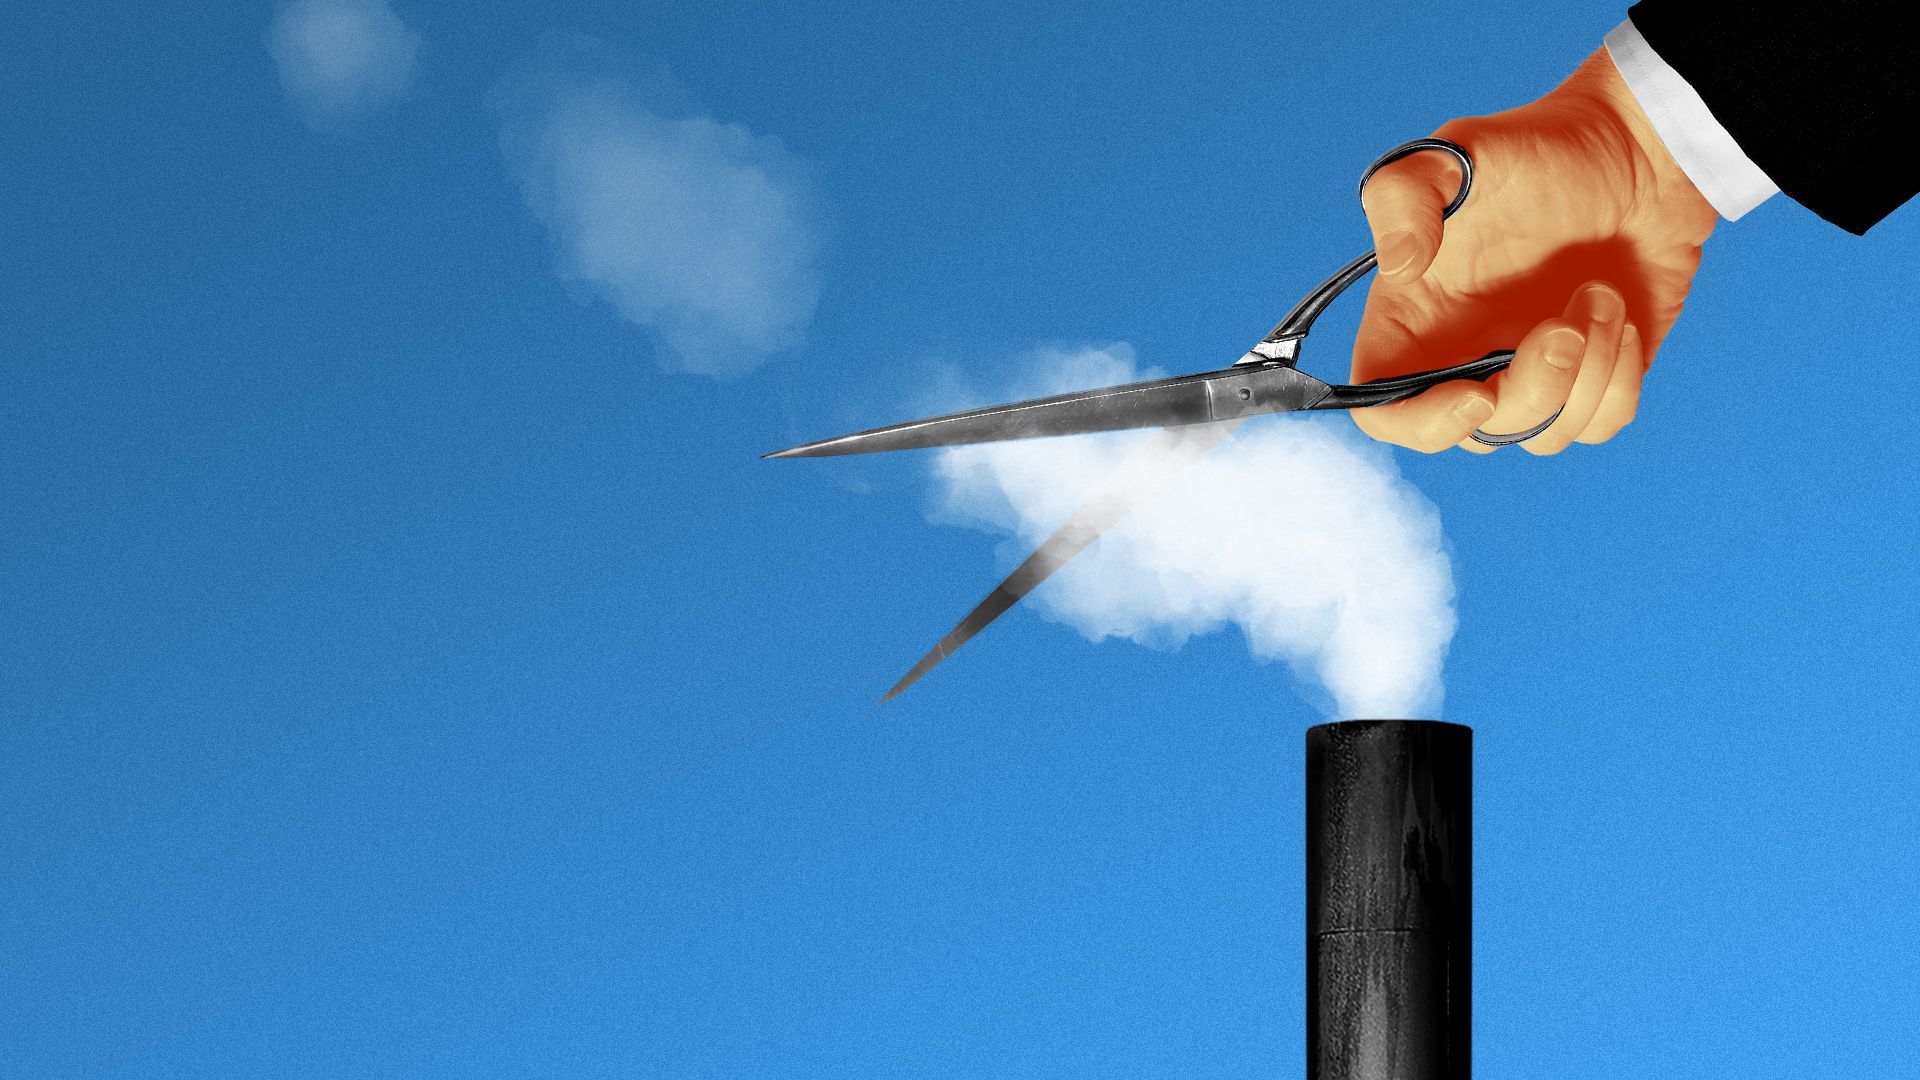 Illustration of a hand with scissor cutting emissions from a smoke stack